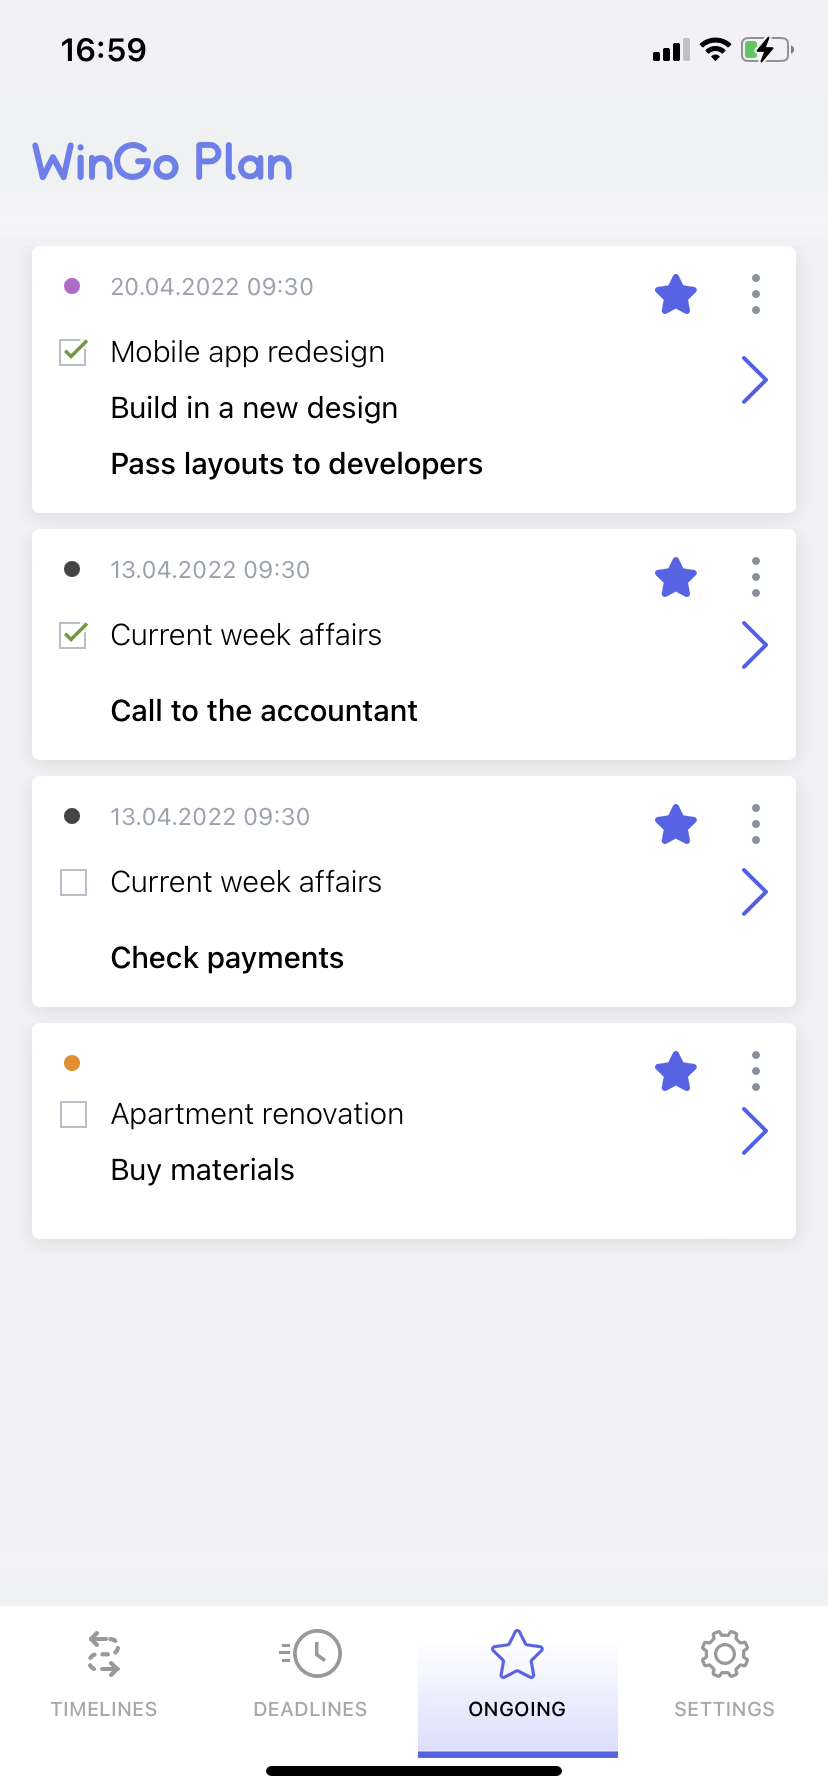 WinGo Plan planner: ongoing tasks and milestones, daily plan